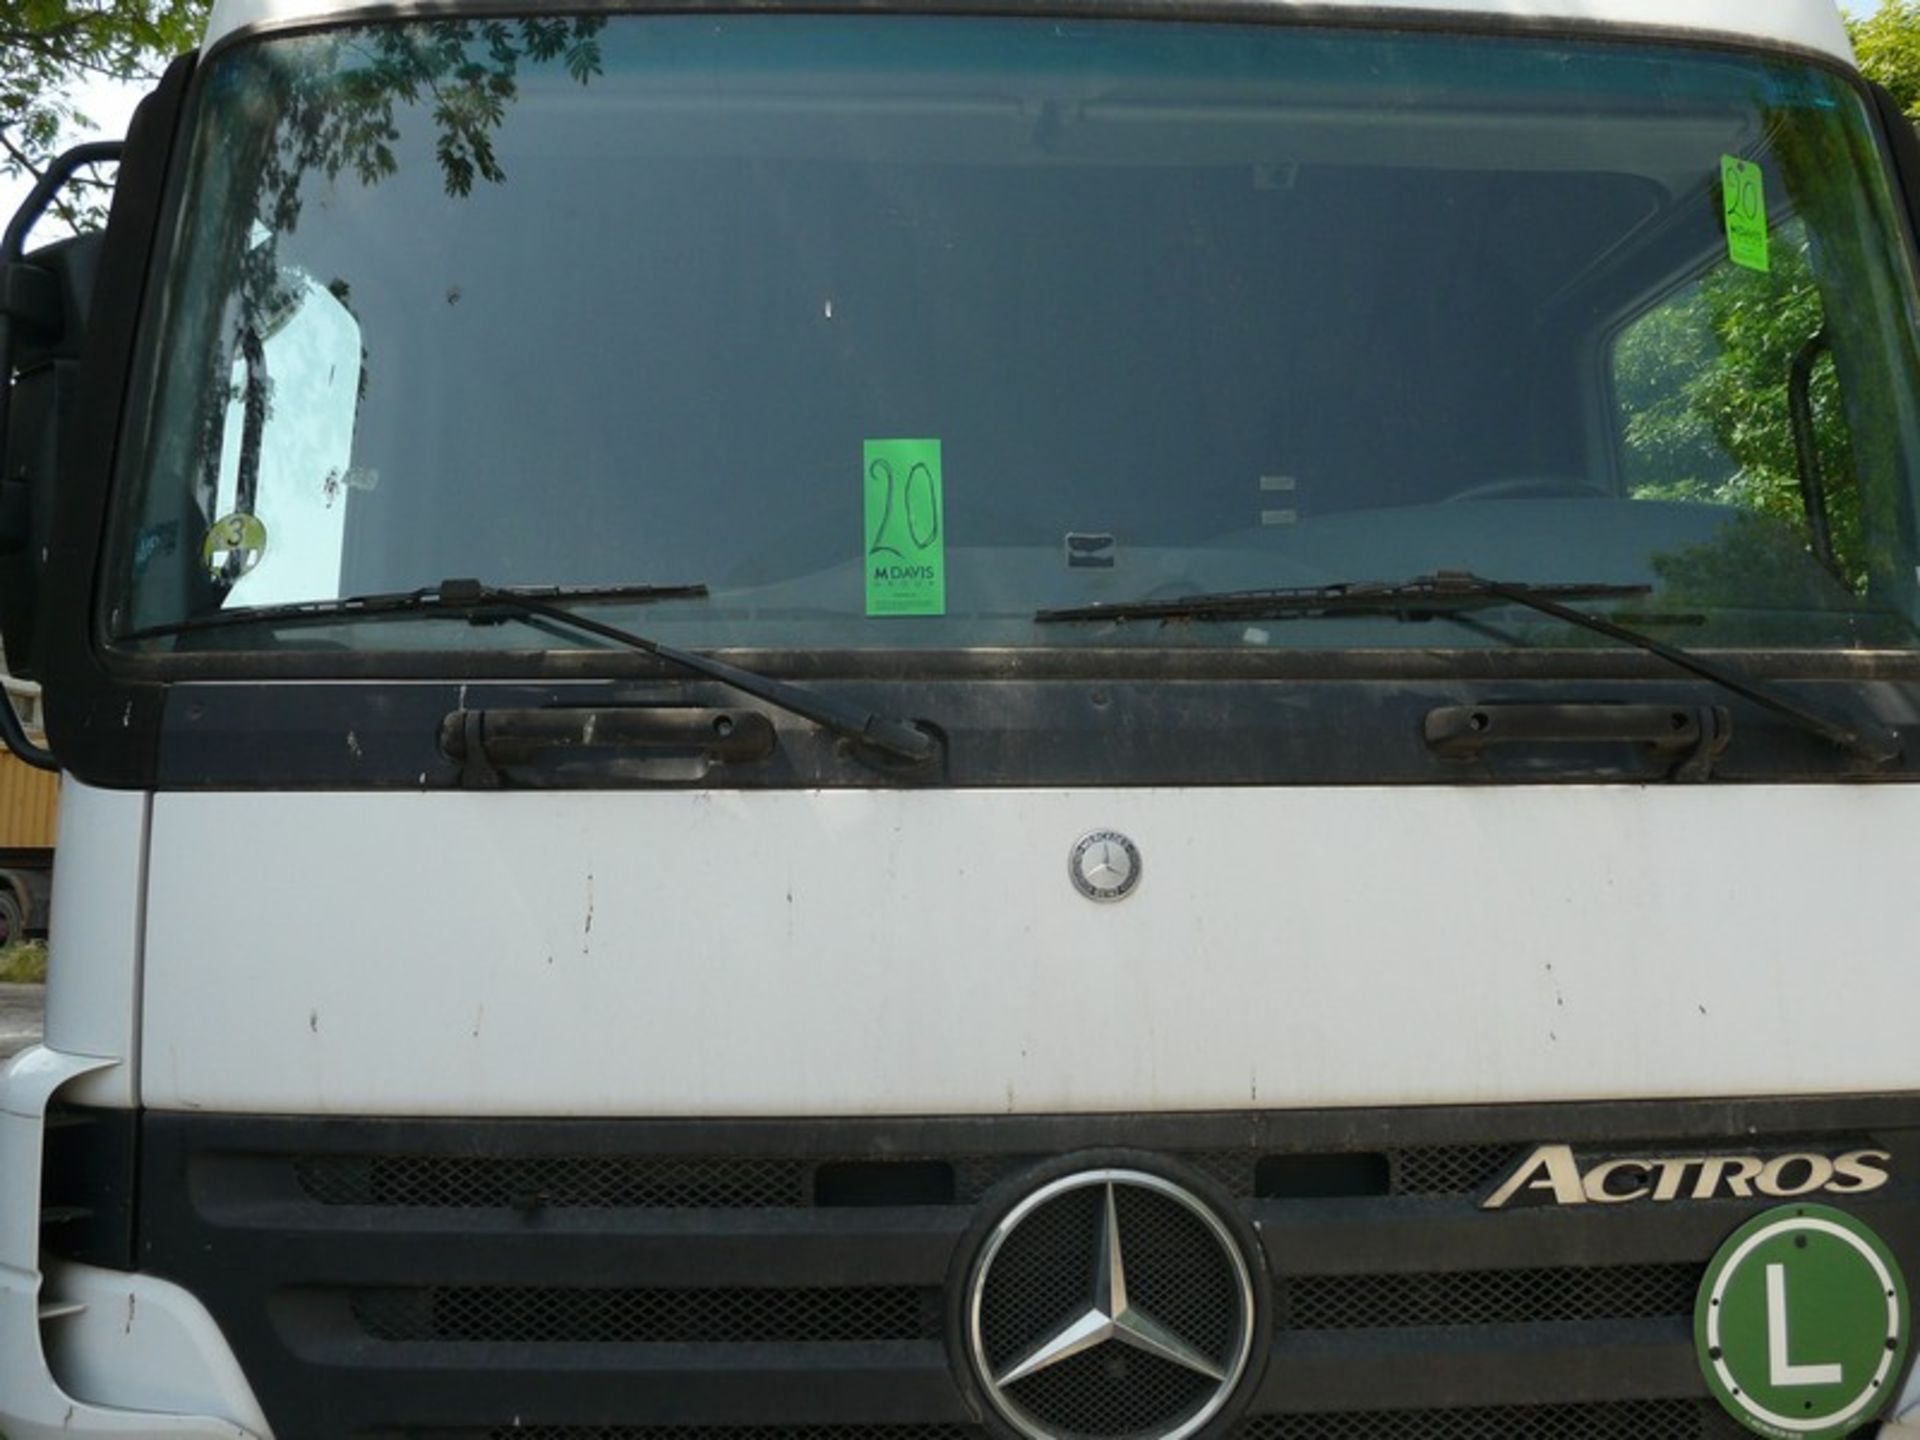 MERCEDES ACTROS Curtain side , REG NIK 4634,DIESEL , KM : 644682,Service Book available , Y.O.M 2004 - Image 2 of 12